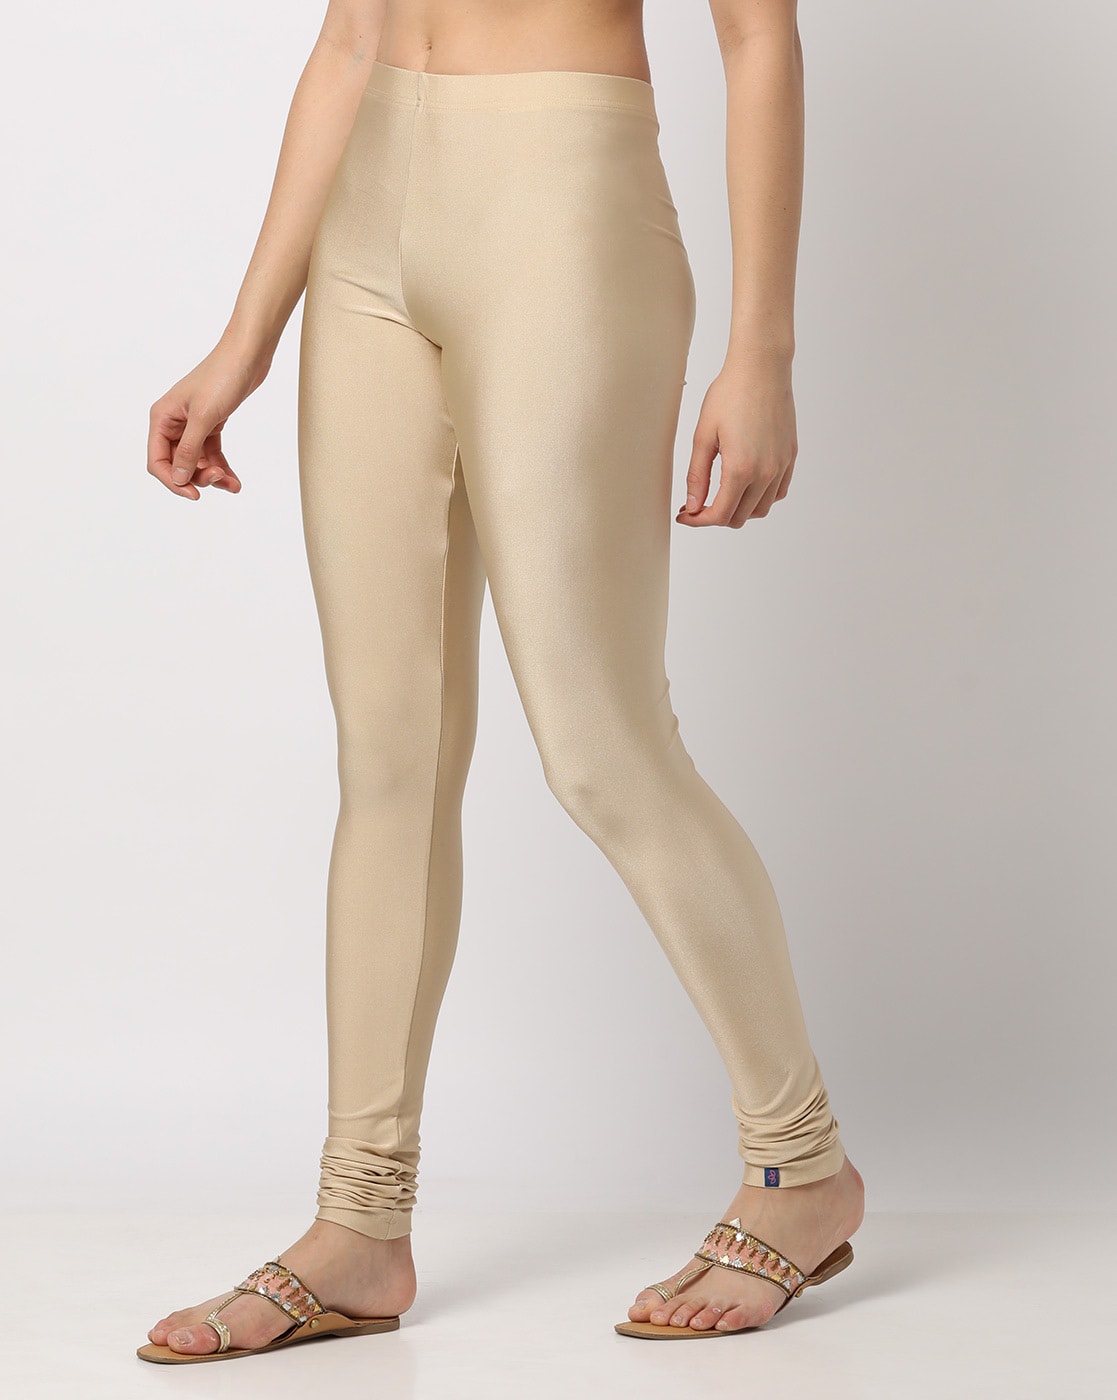 Avaasa Ankle Length Leggings in Tumkur - Dealers, Manufacturers & Suppliers  -Justdial